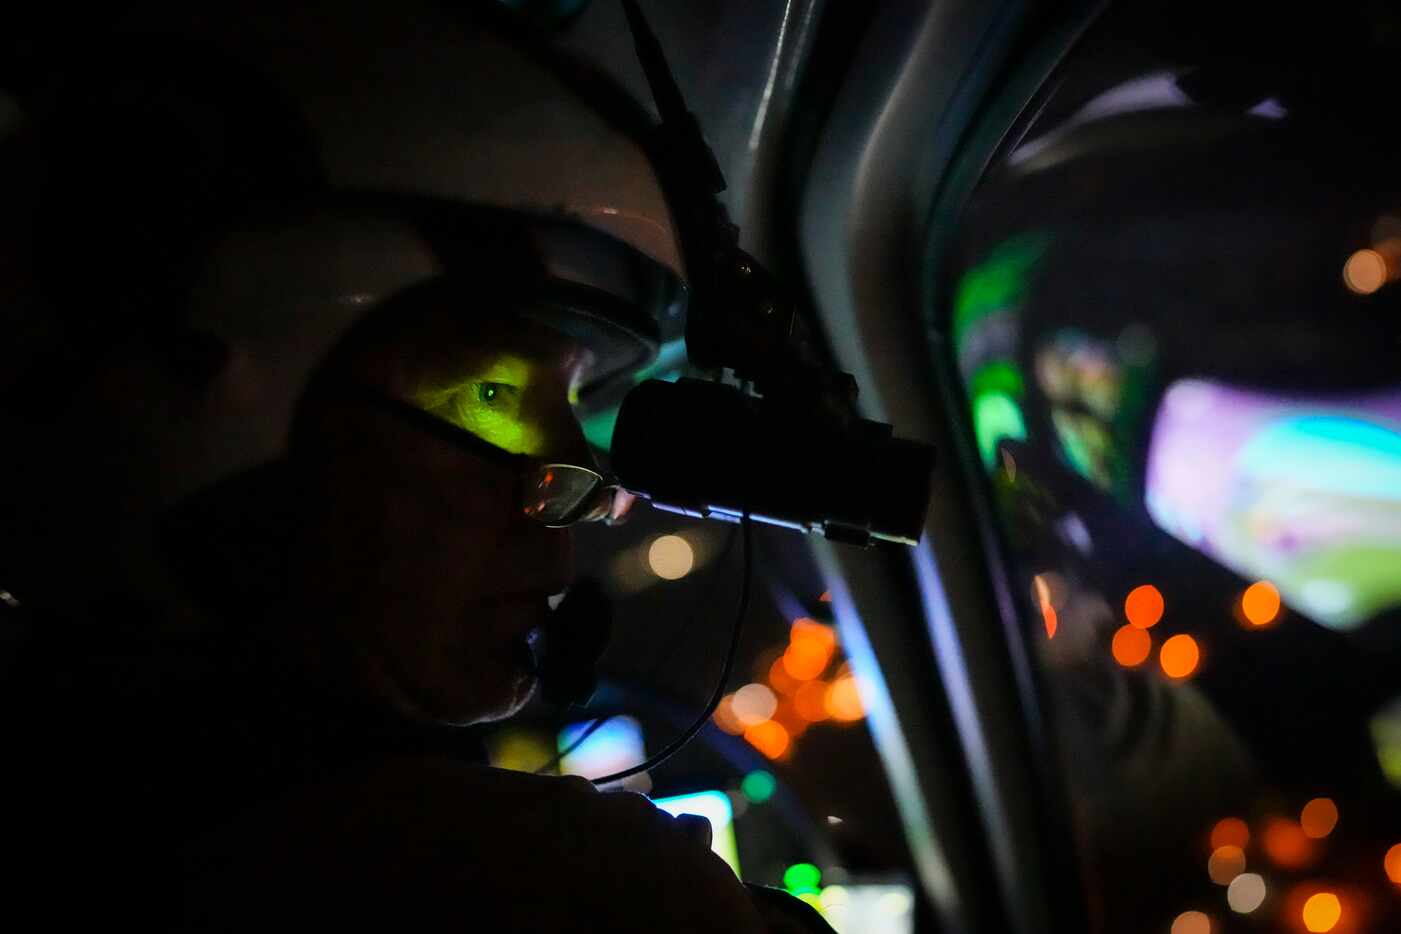 Texas Department of Public Safety pilot Lt. Donny Kindred uses night vision goggles as he...